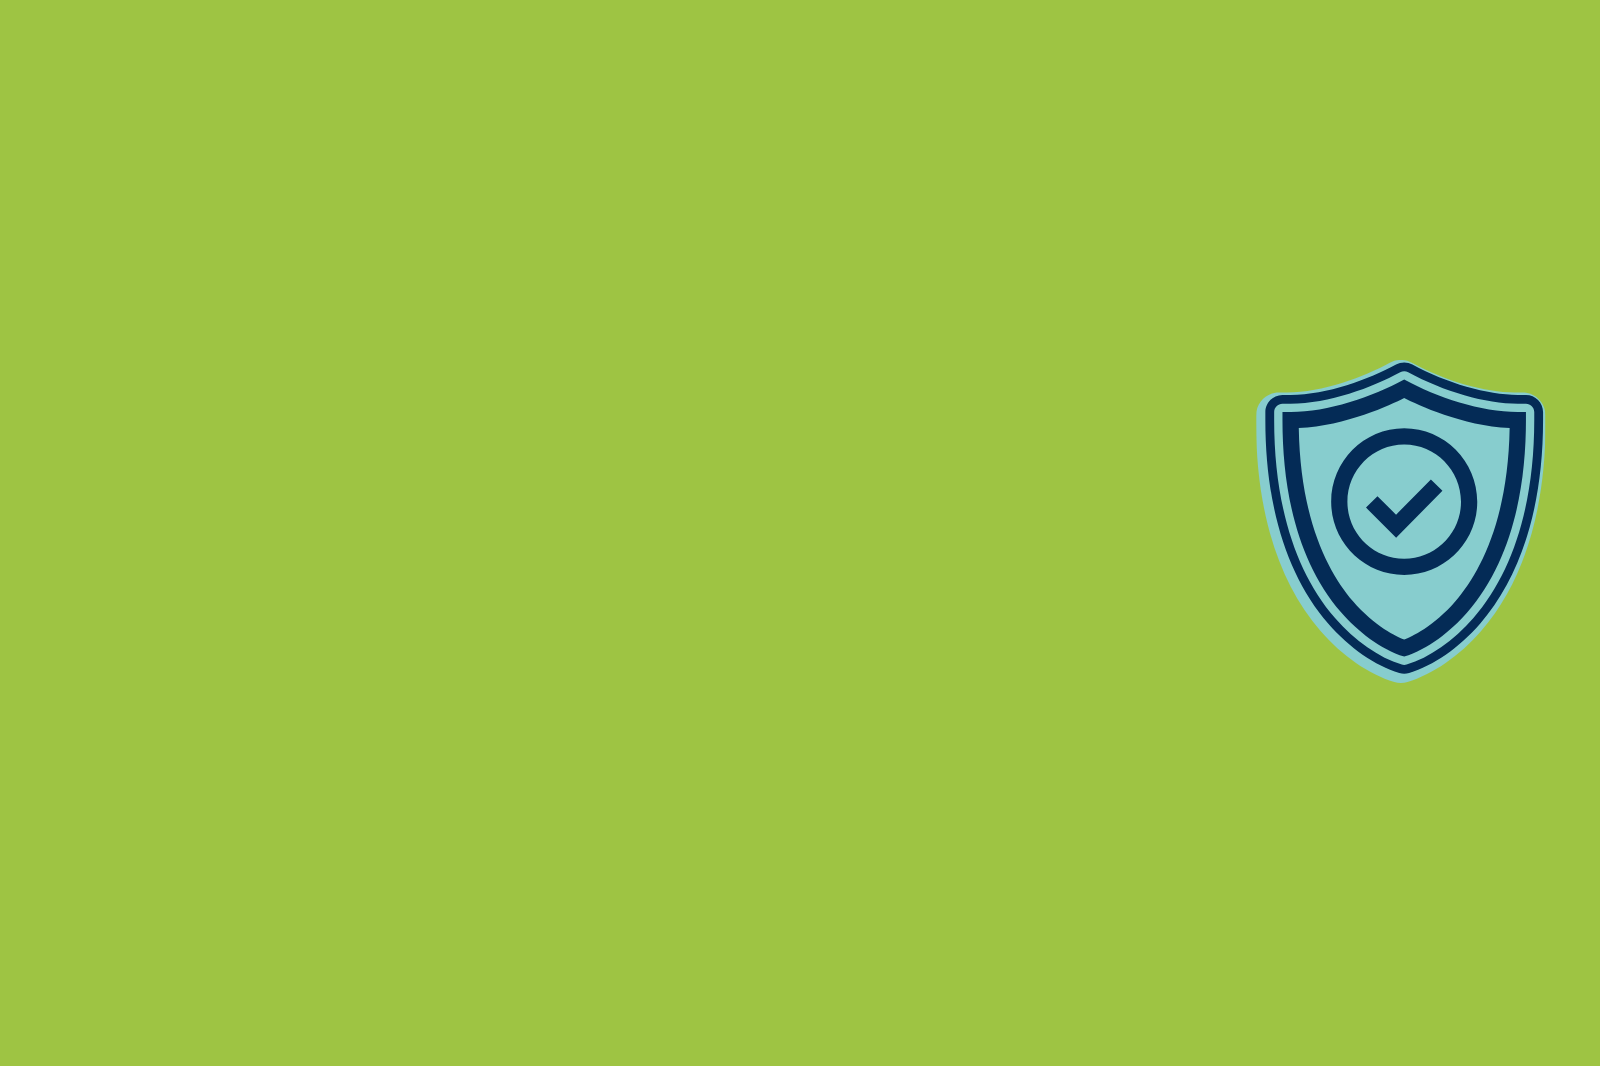 A blue shield symbolizing trust on a green background represents data ethics in the digital age.